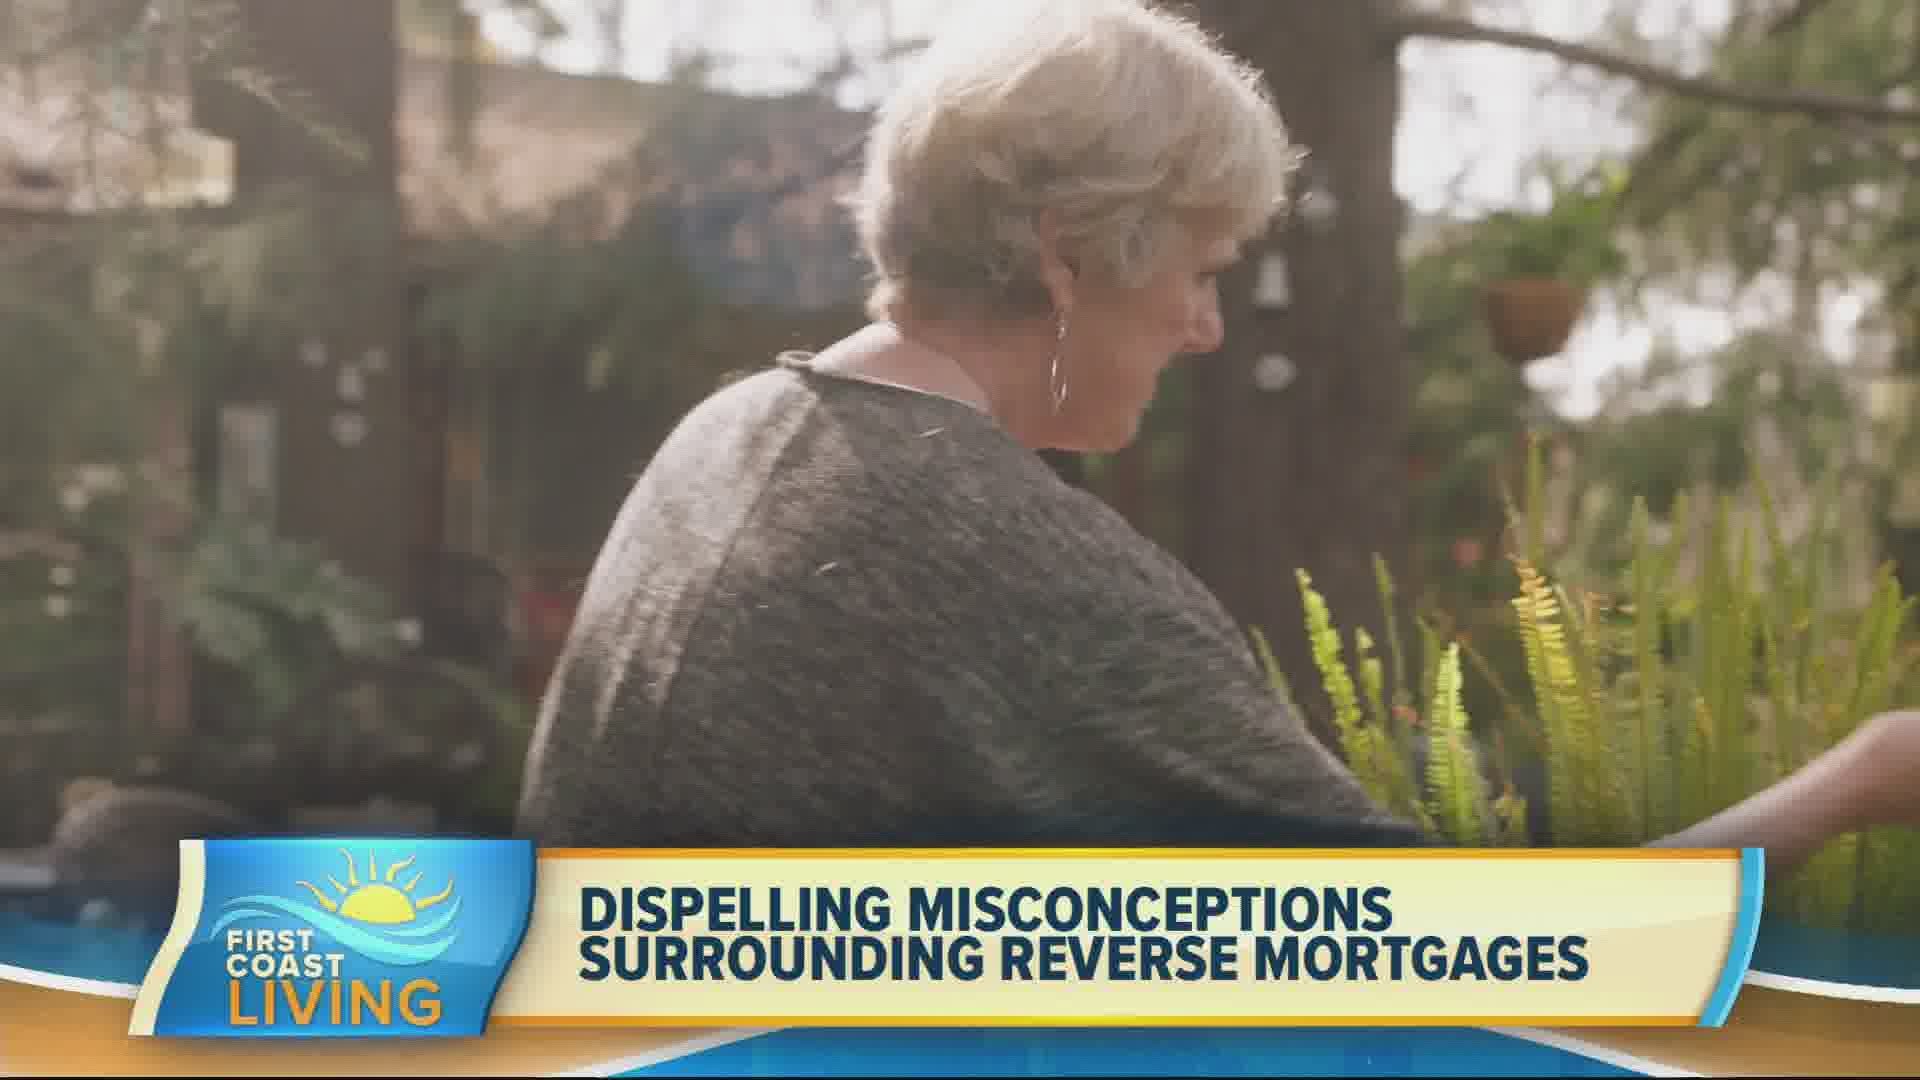 Financial expert dispels myths and misconceptions about reverse mortgages.